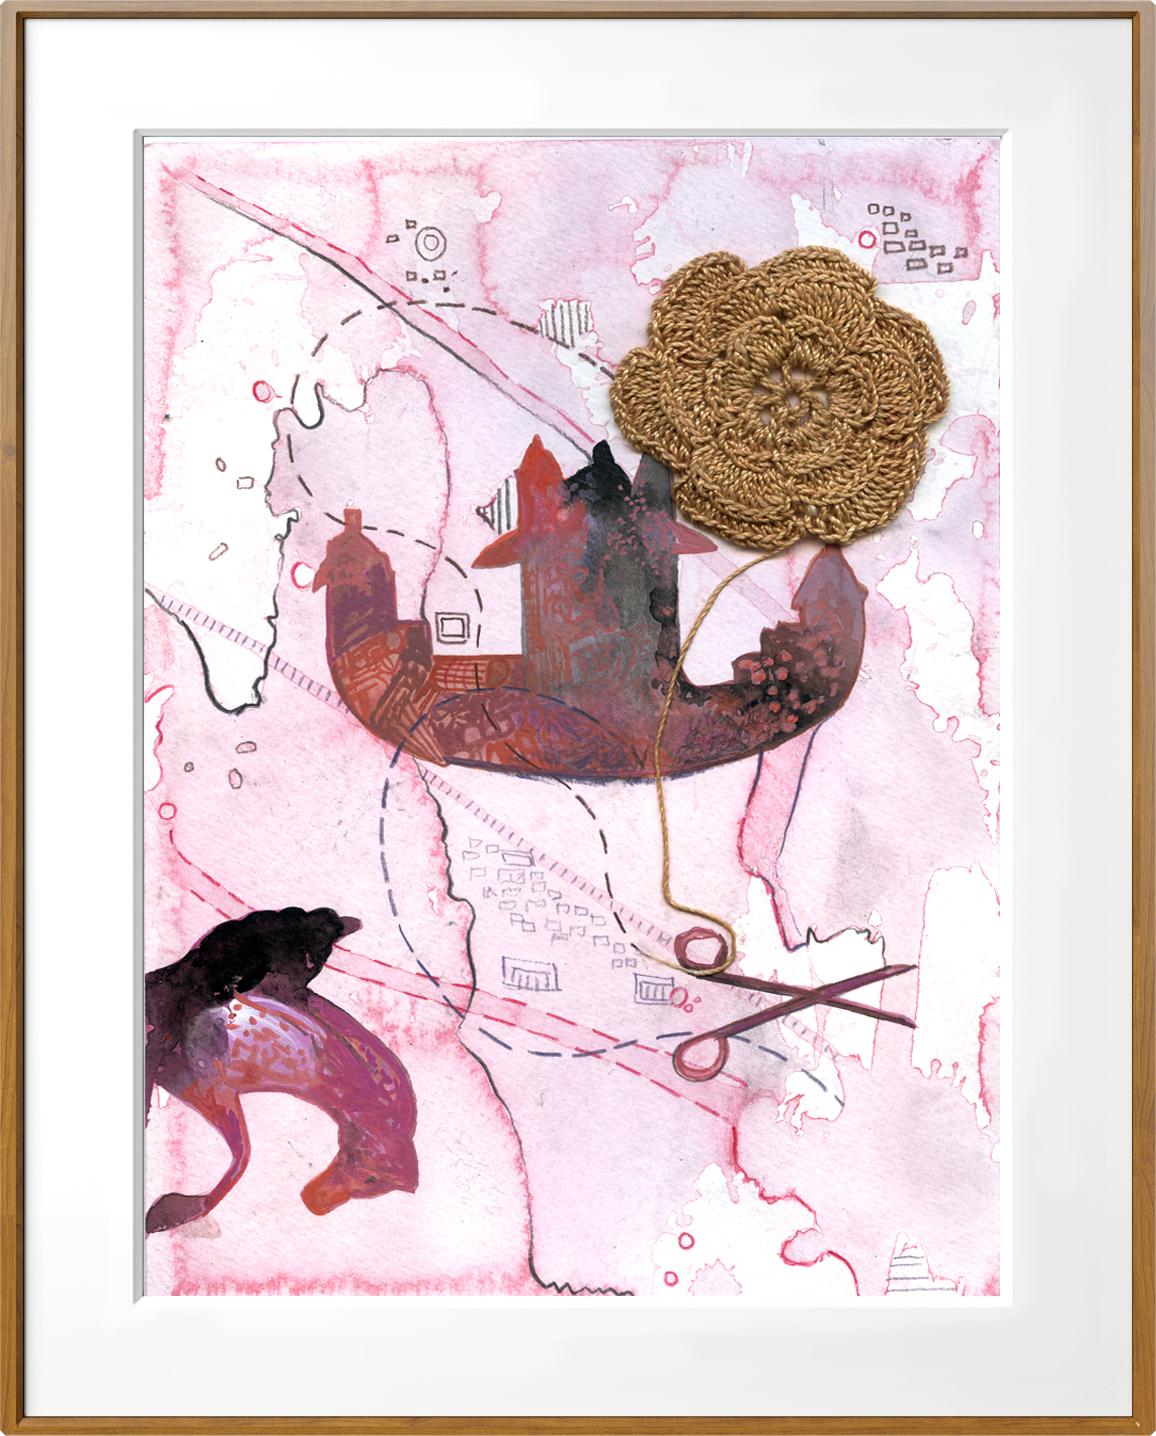 Birth Healing -  14 panel Pink, Red, and Grey Painting by Indian Artist  7